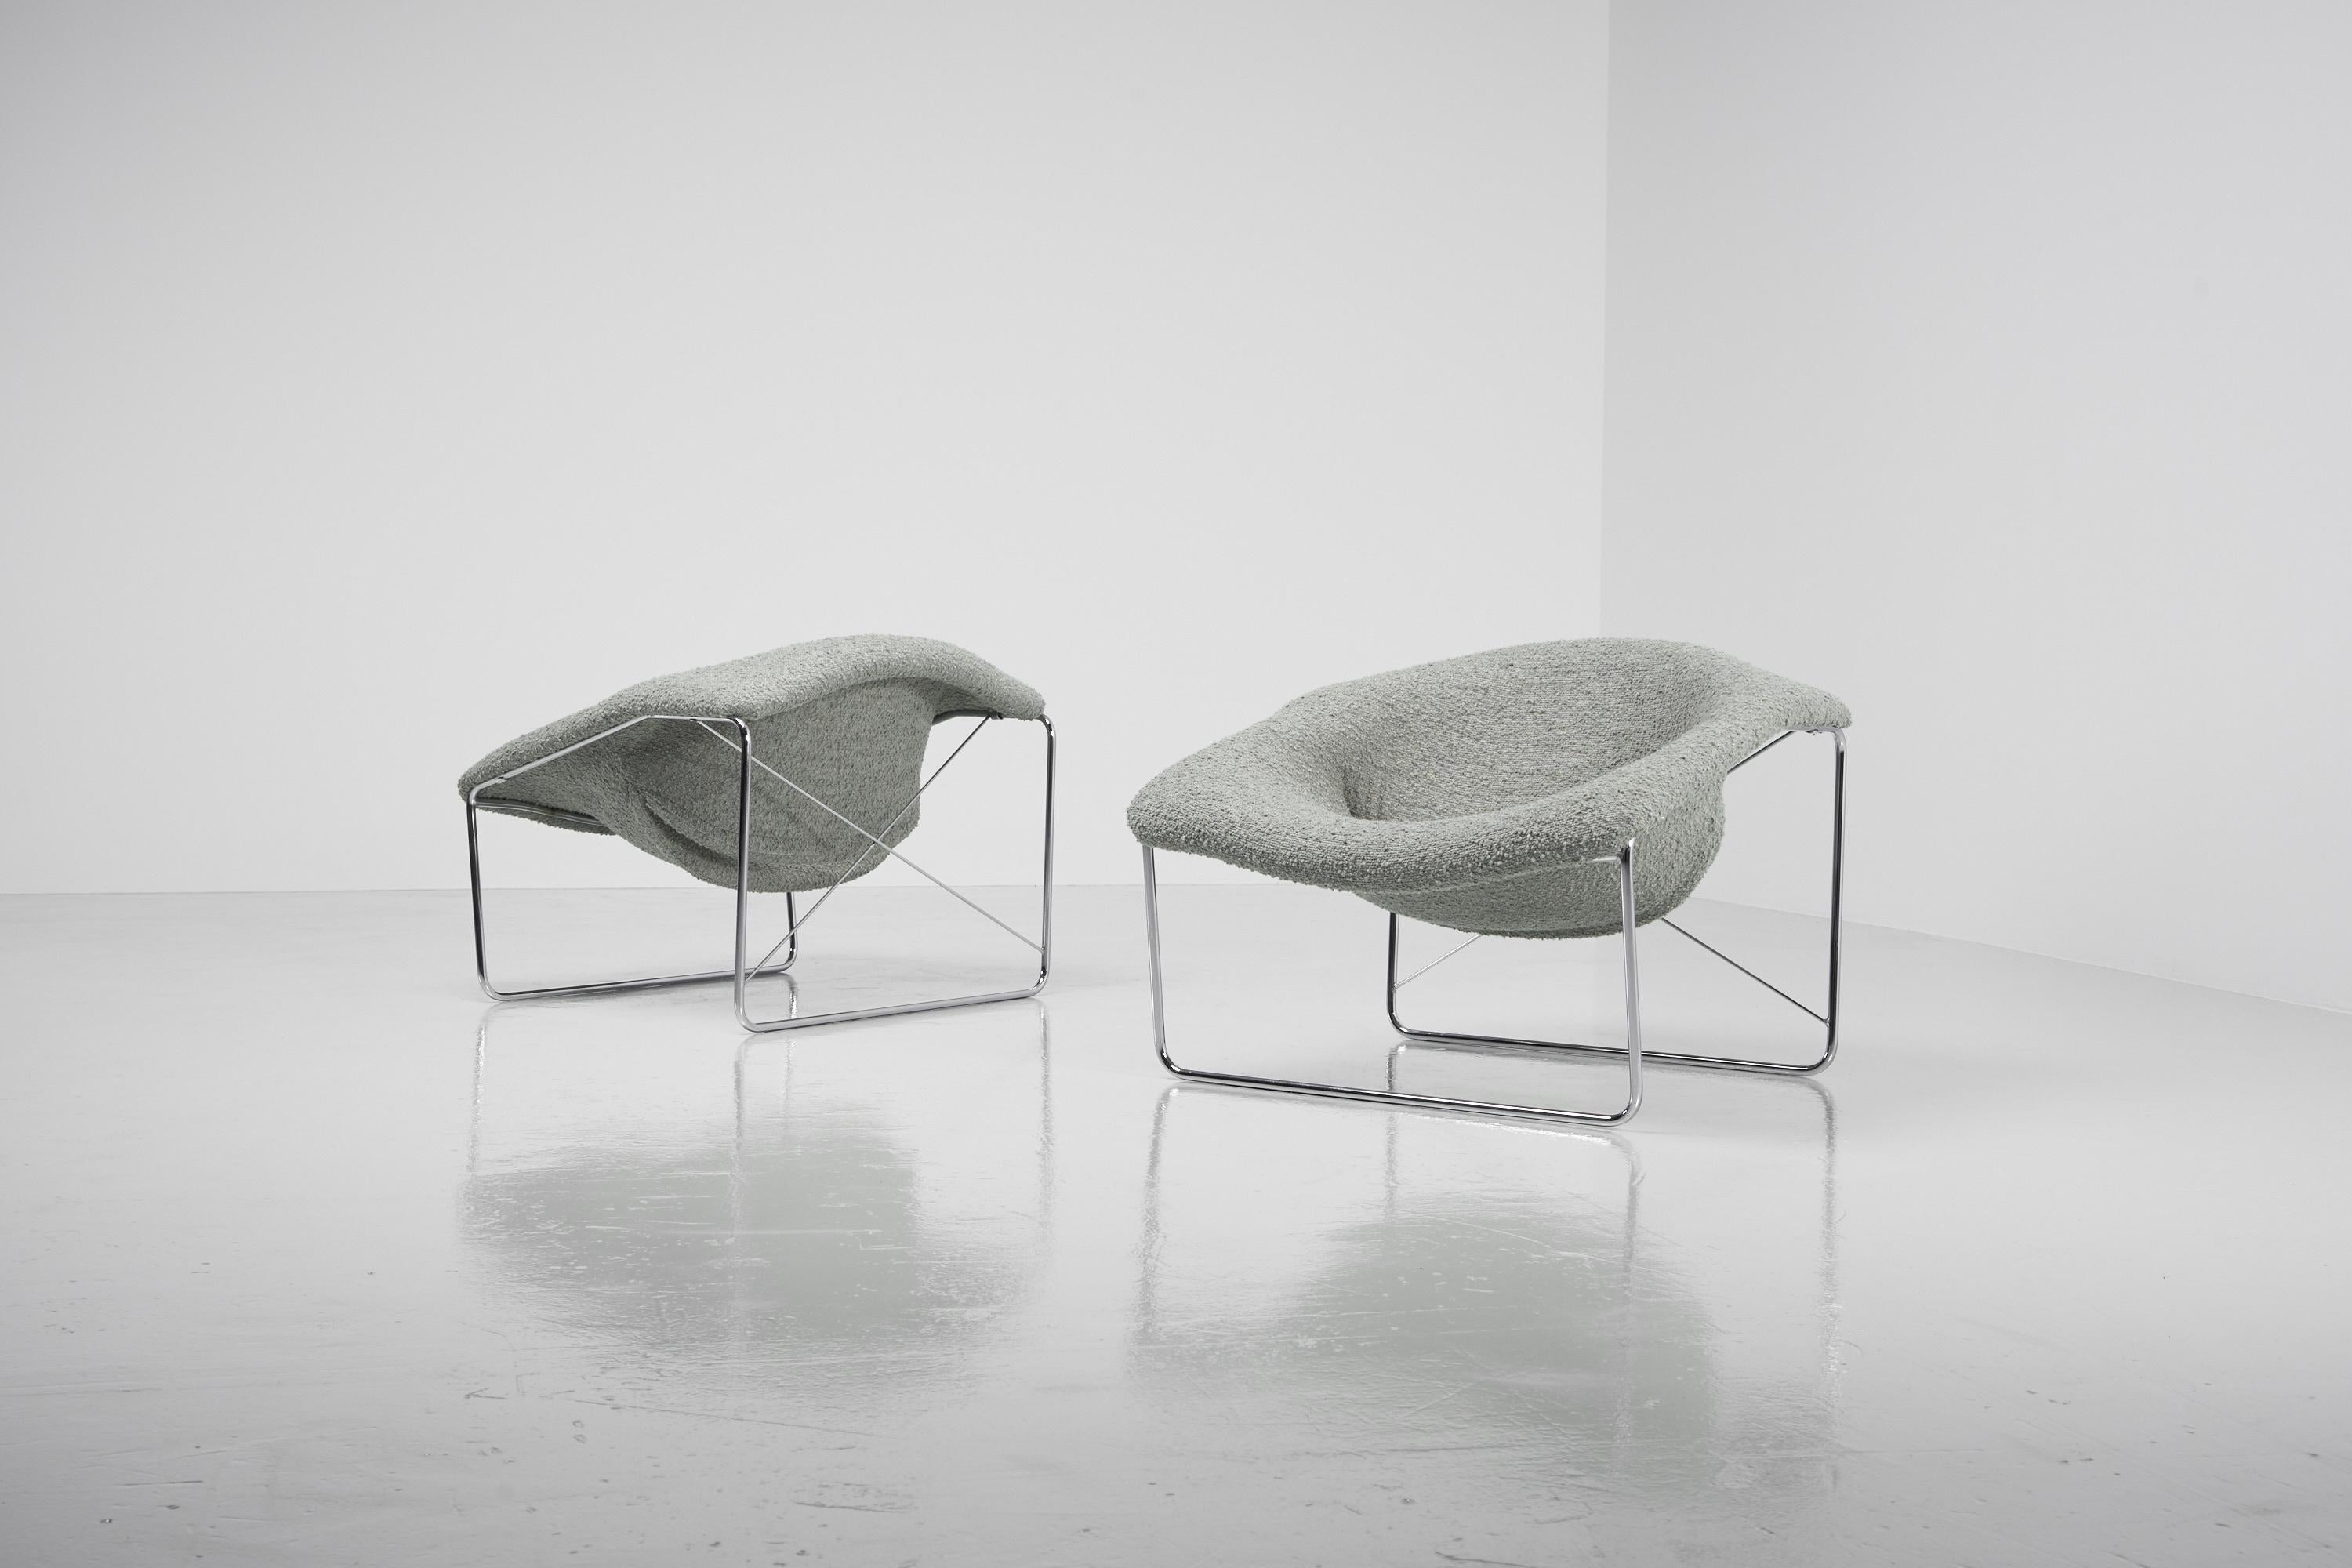 Stunning shaped pair of so called 'Cubique' lounge chairs designed by Olivier Mourgue and manufactured by Airborne, France 1968. These chairs have a solid tubular steel structure which is chrome plated and the seats are upholstered in a very nice